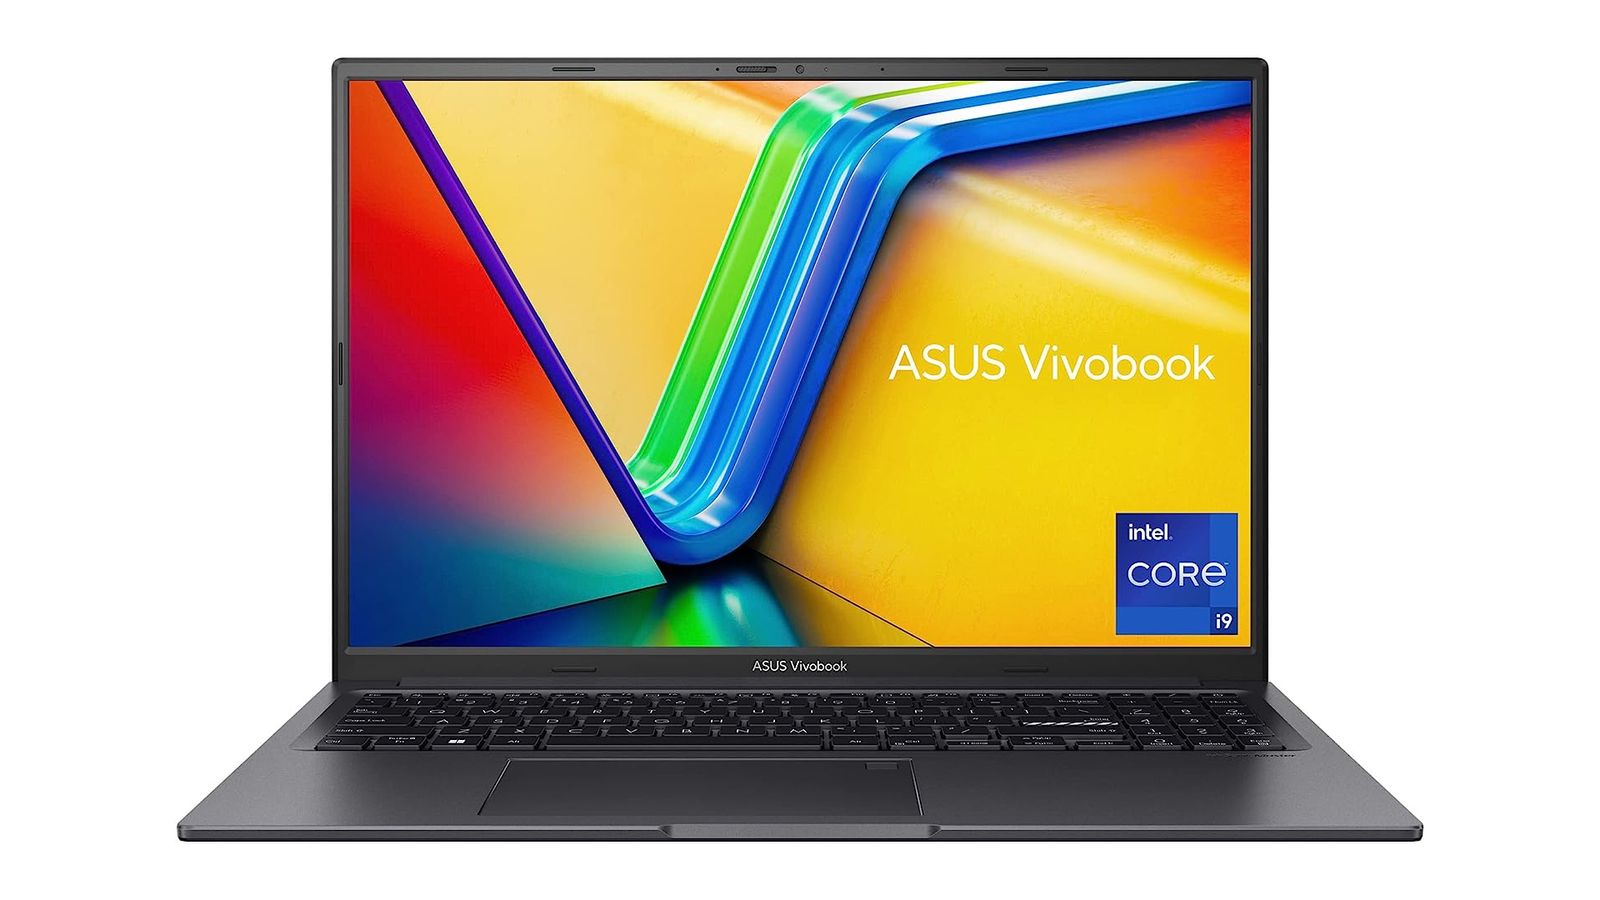 ASUS Vivobook 16X product image of a black laptop with a yellow, blue, green, and red pattern on the display.